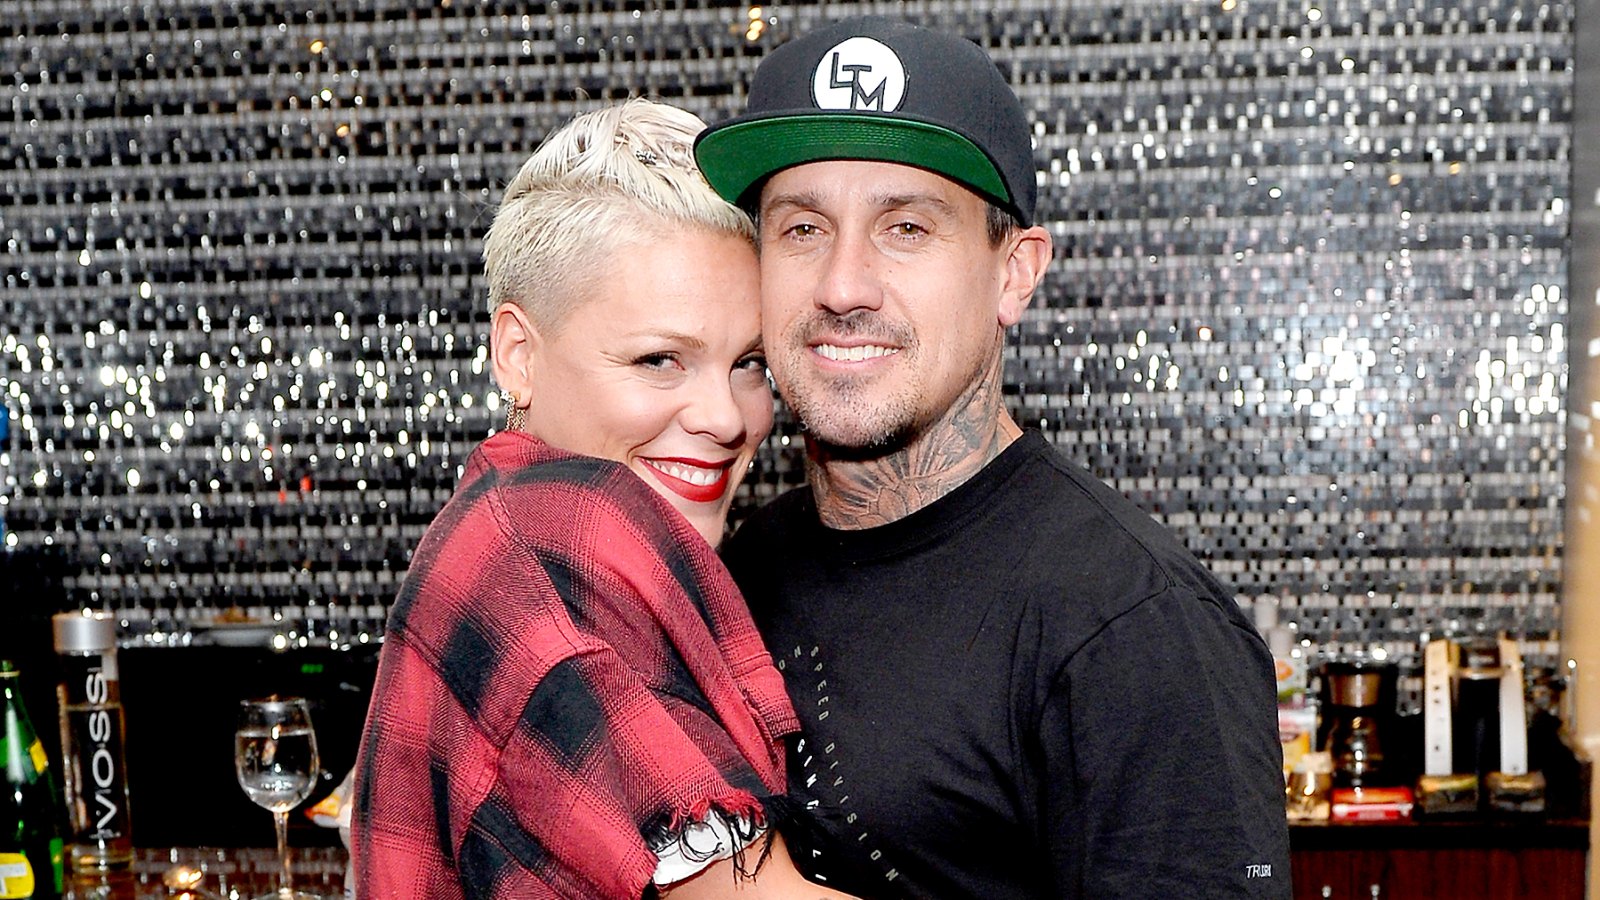 Pink and Carey Hart attend a surprise event in support of Carey Hart's Good Ride Rally benefiting Infinite Hero Foundation at The D Bar, at the D Las Vegas on October 5, 2017 in Las Vegas, Nevada.